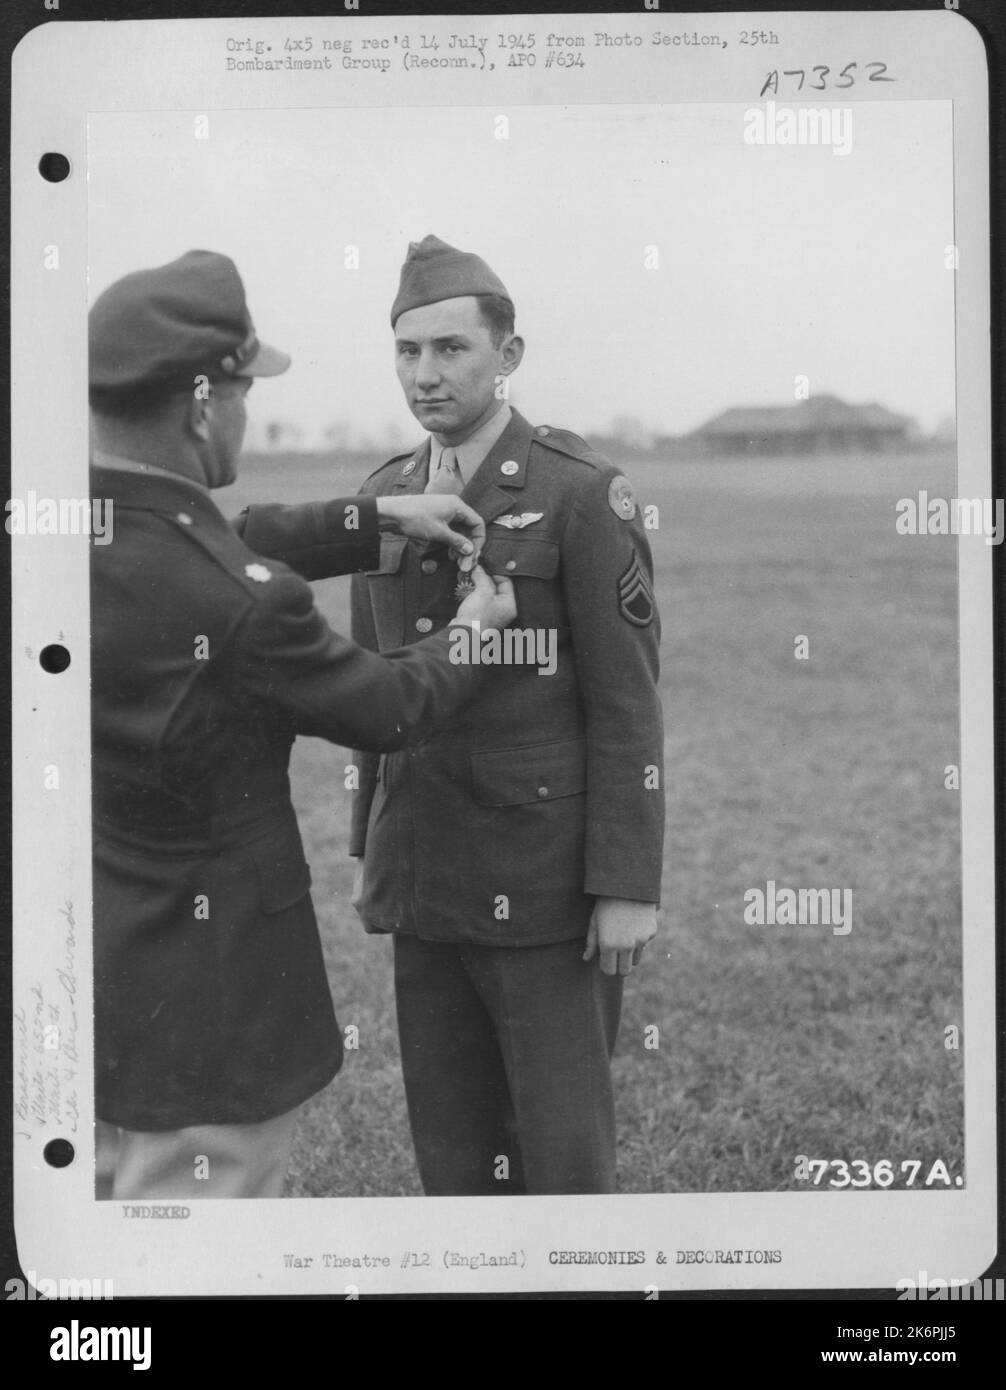 S/Sgt. G.A. Stransky Of The 652Nd Weather Reconnaissance Squadron, 25Th Weather Reconnaissance Group Is Presented The Air Medal At An 8Th Air Force Base In England. 10 June 1944. Stock Photo